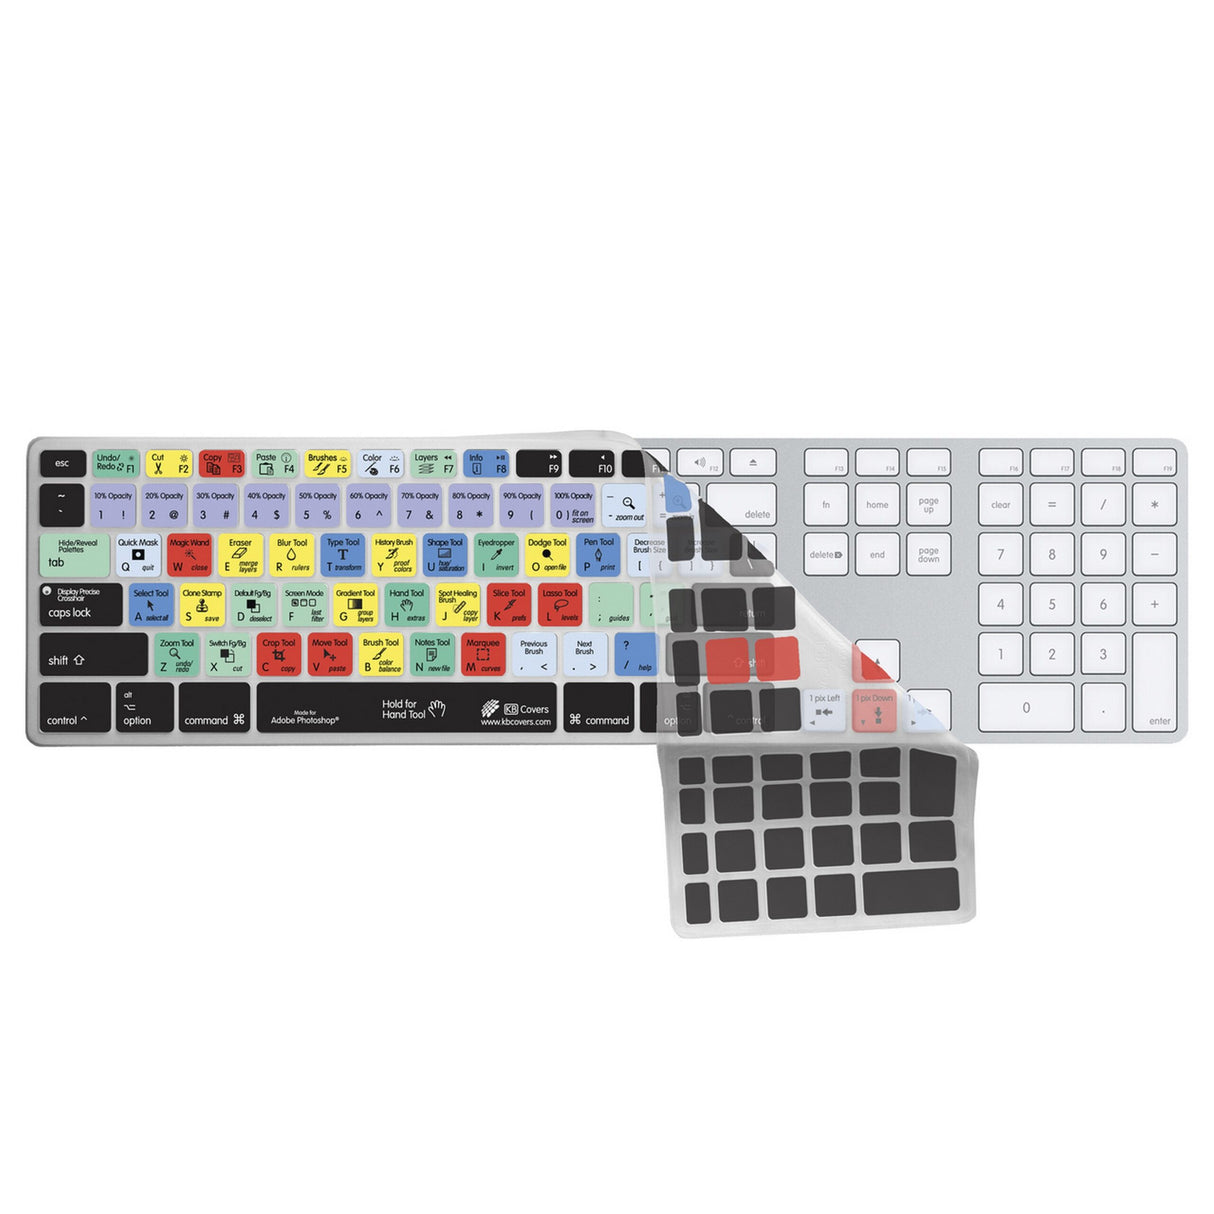 KB Covers PS-AK-CC-2 Photoshop Keyboard Cover for Apple Ultra-Thin Keyboard with Num Pad